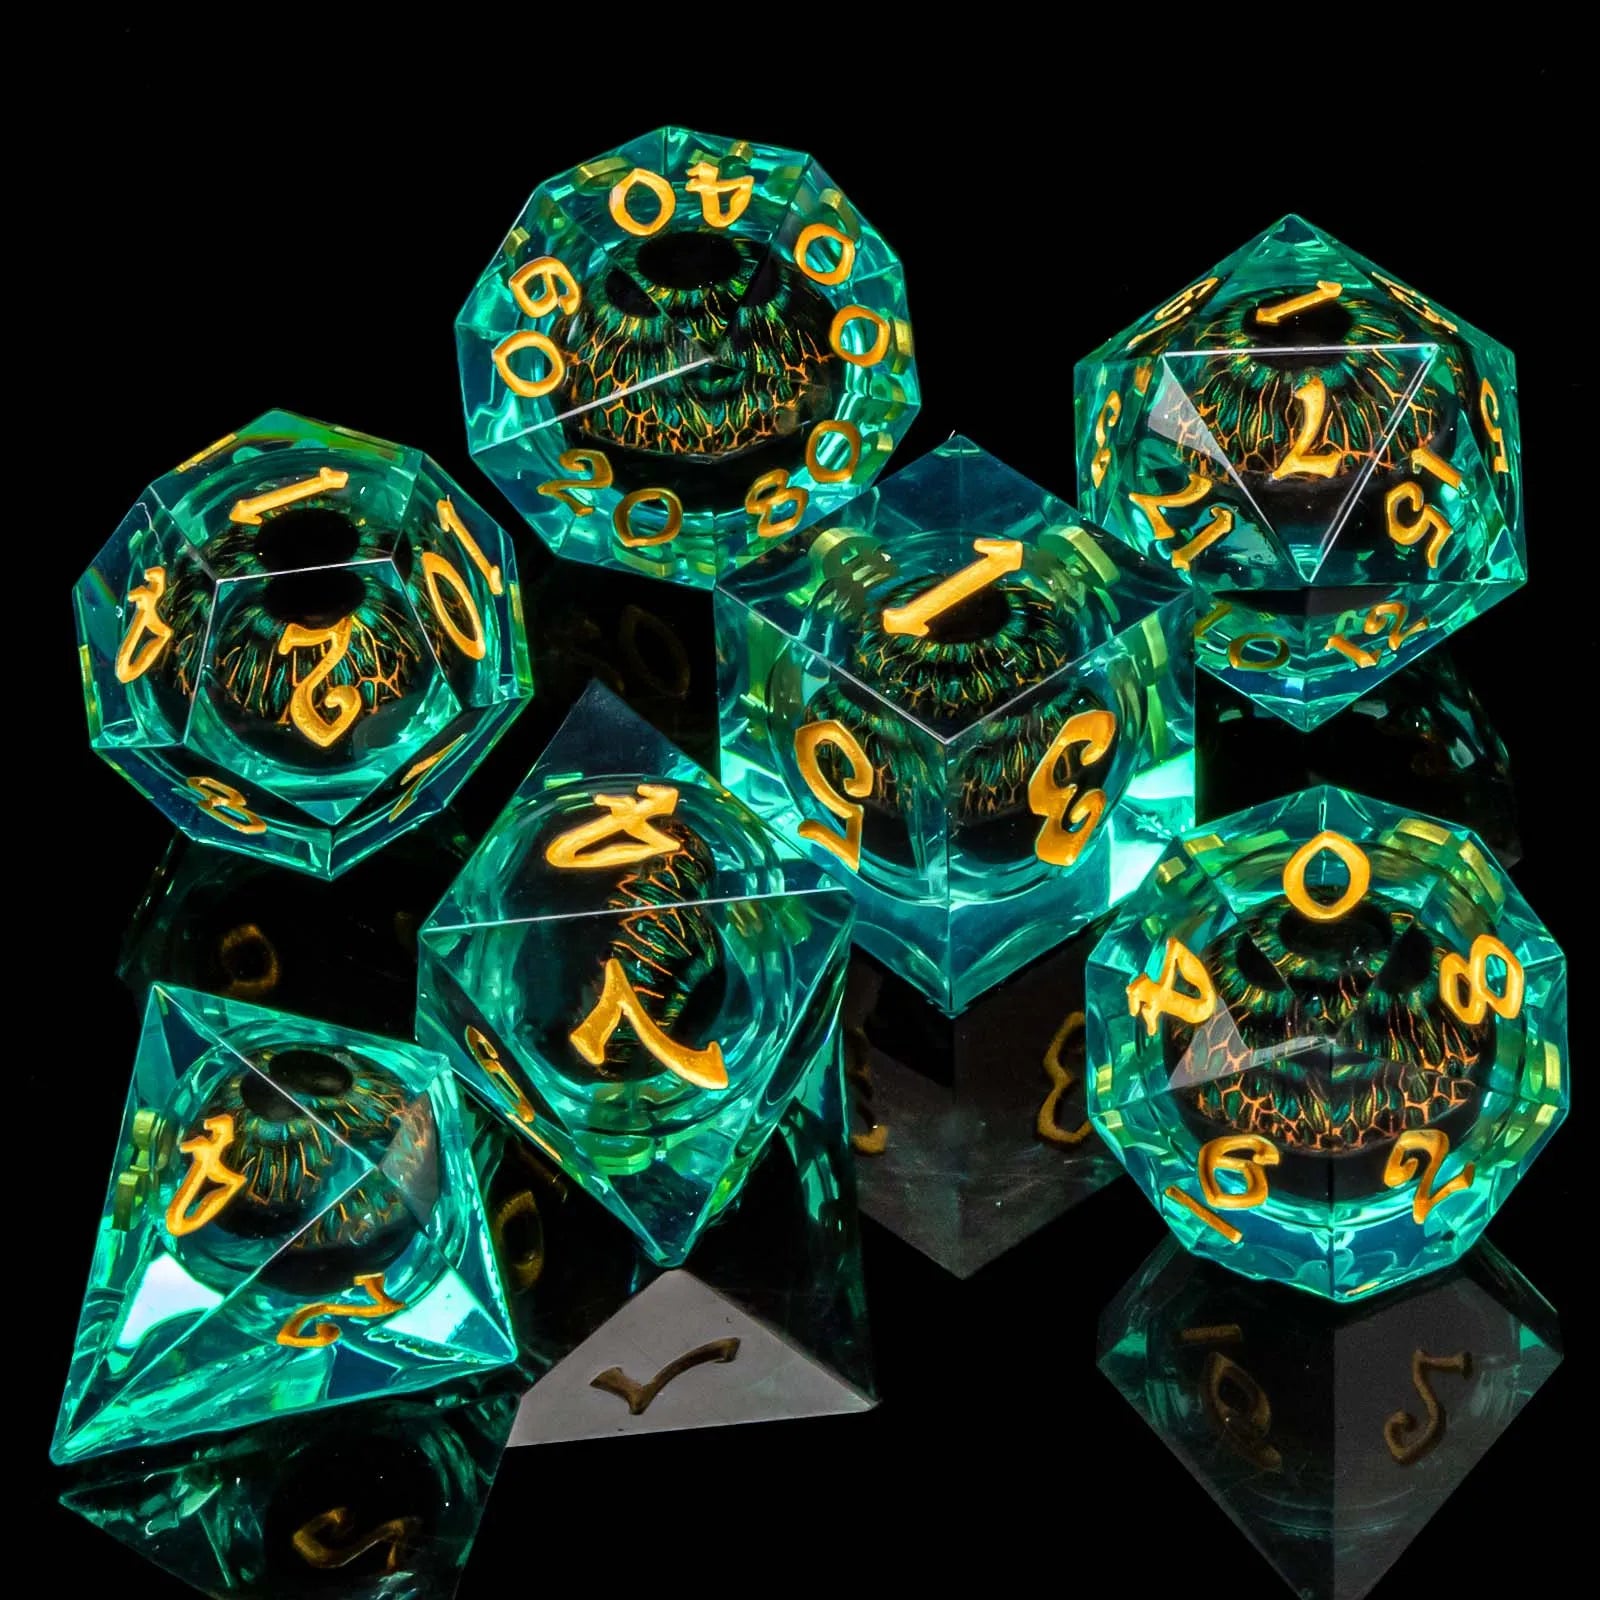 DND Eye Liquid Flow Core Resin D&D Dice Set For D and D Dungeon and Dragon Pathfinder Table Role Playing Game Polyhedral Dice AZ18